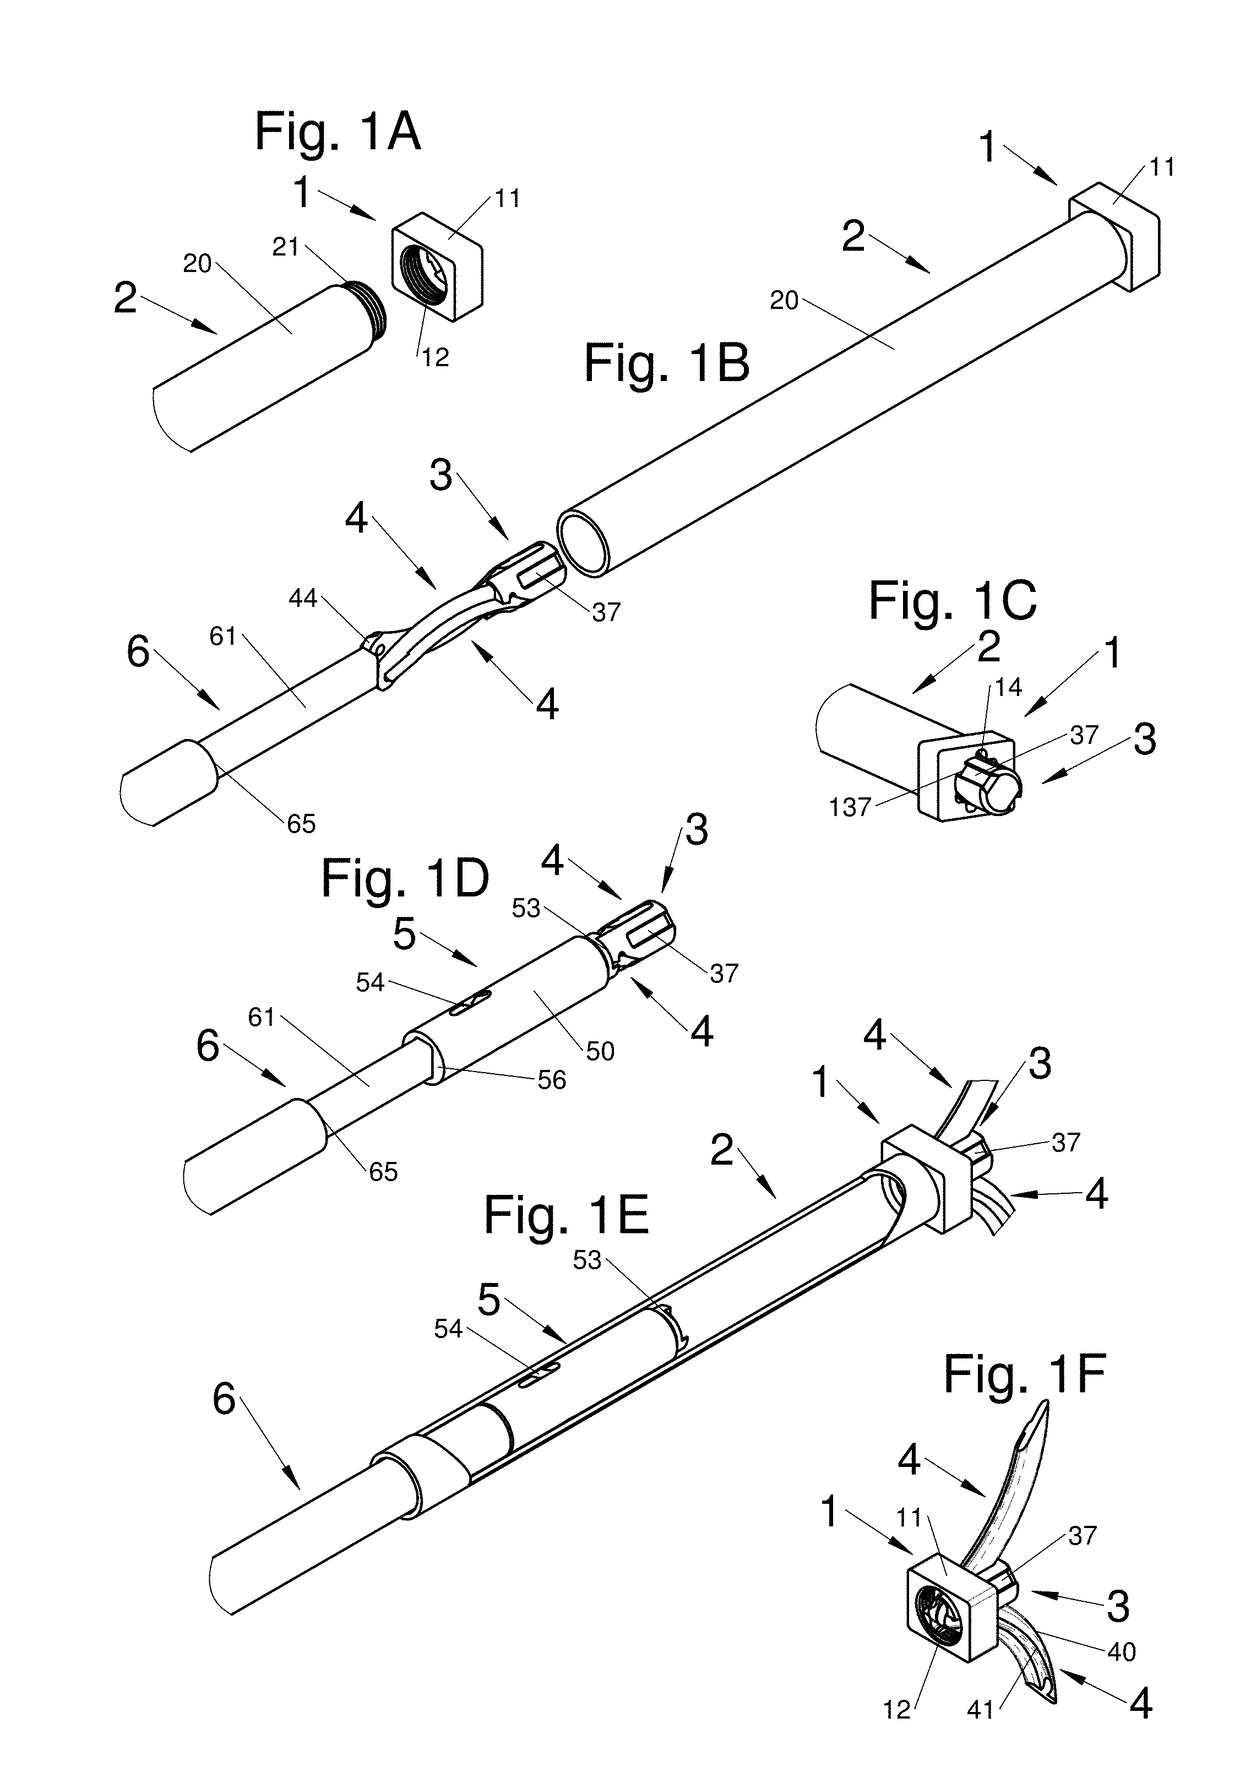 Bone anchoring system, associated implant and instrumentation